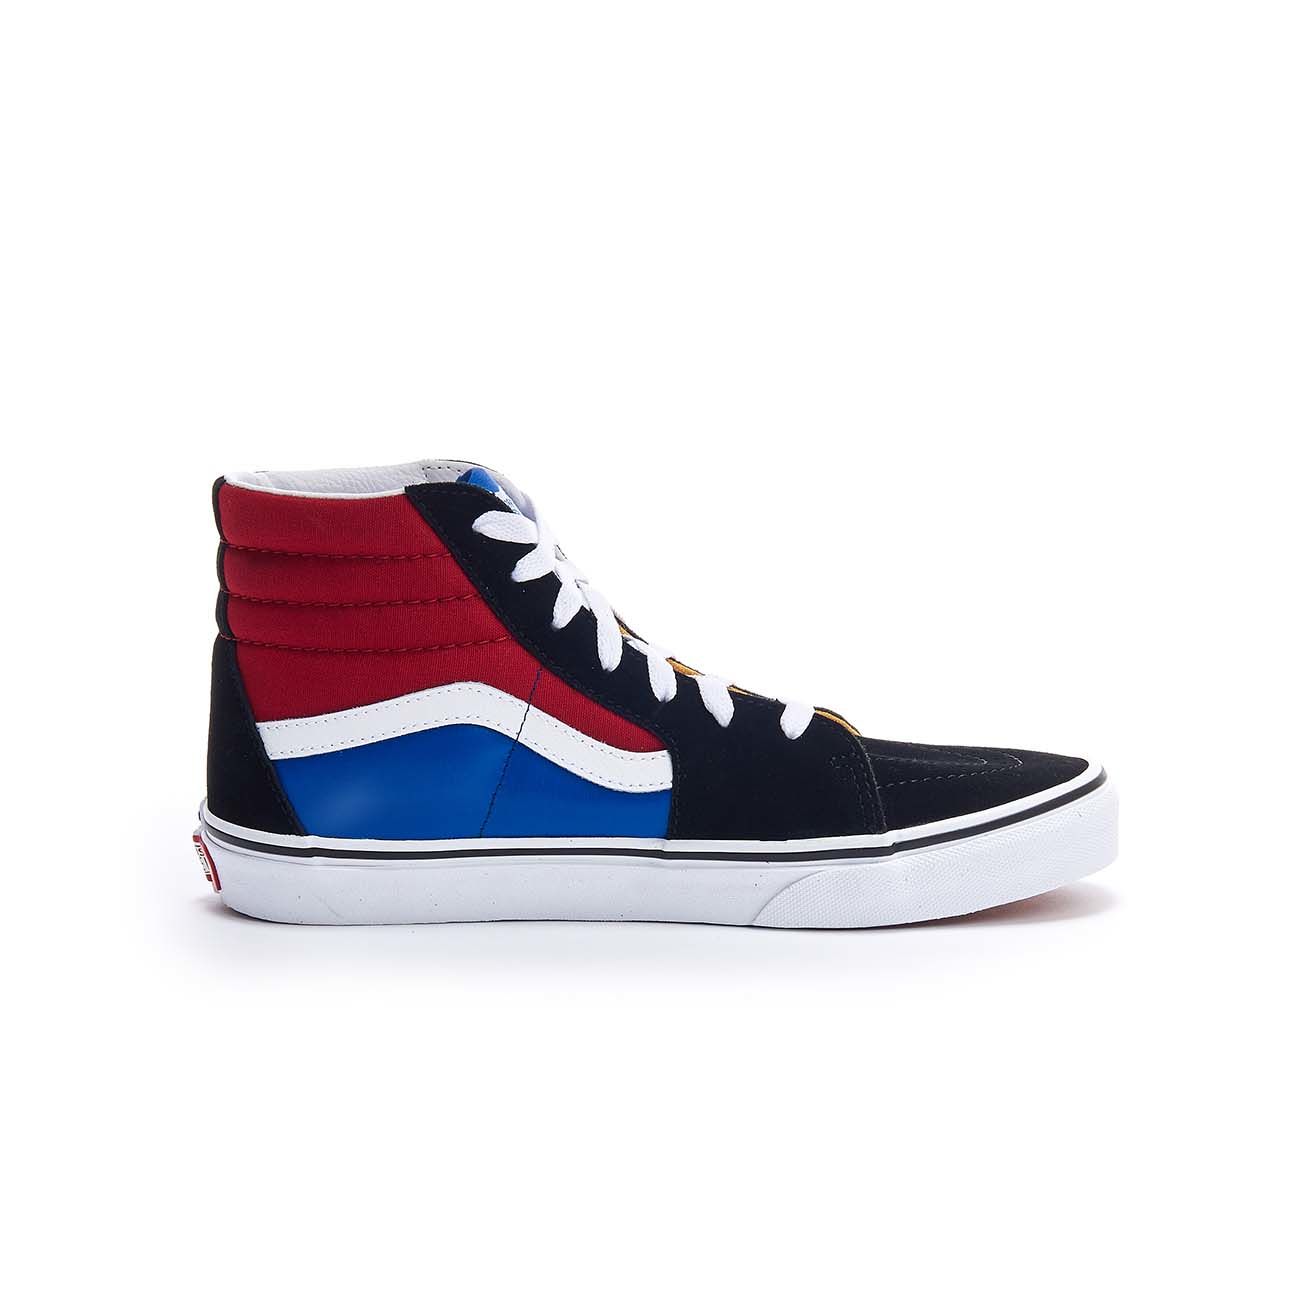 VANS SK8-HI HIGH Pepper Mascheroni AND | Black ECO-LEATHER Store IN Chilli Kid FABRIC SNEAKER